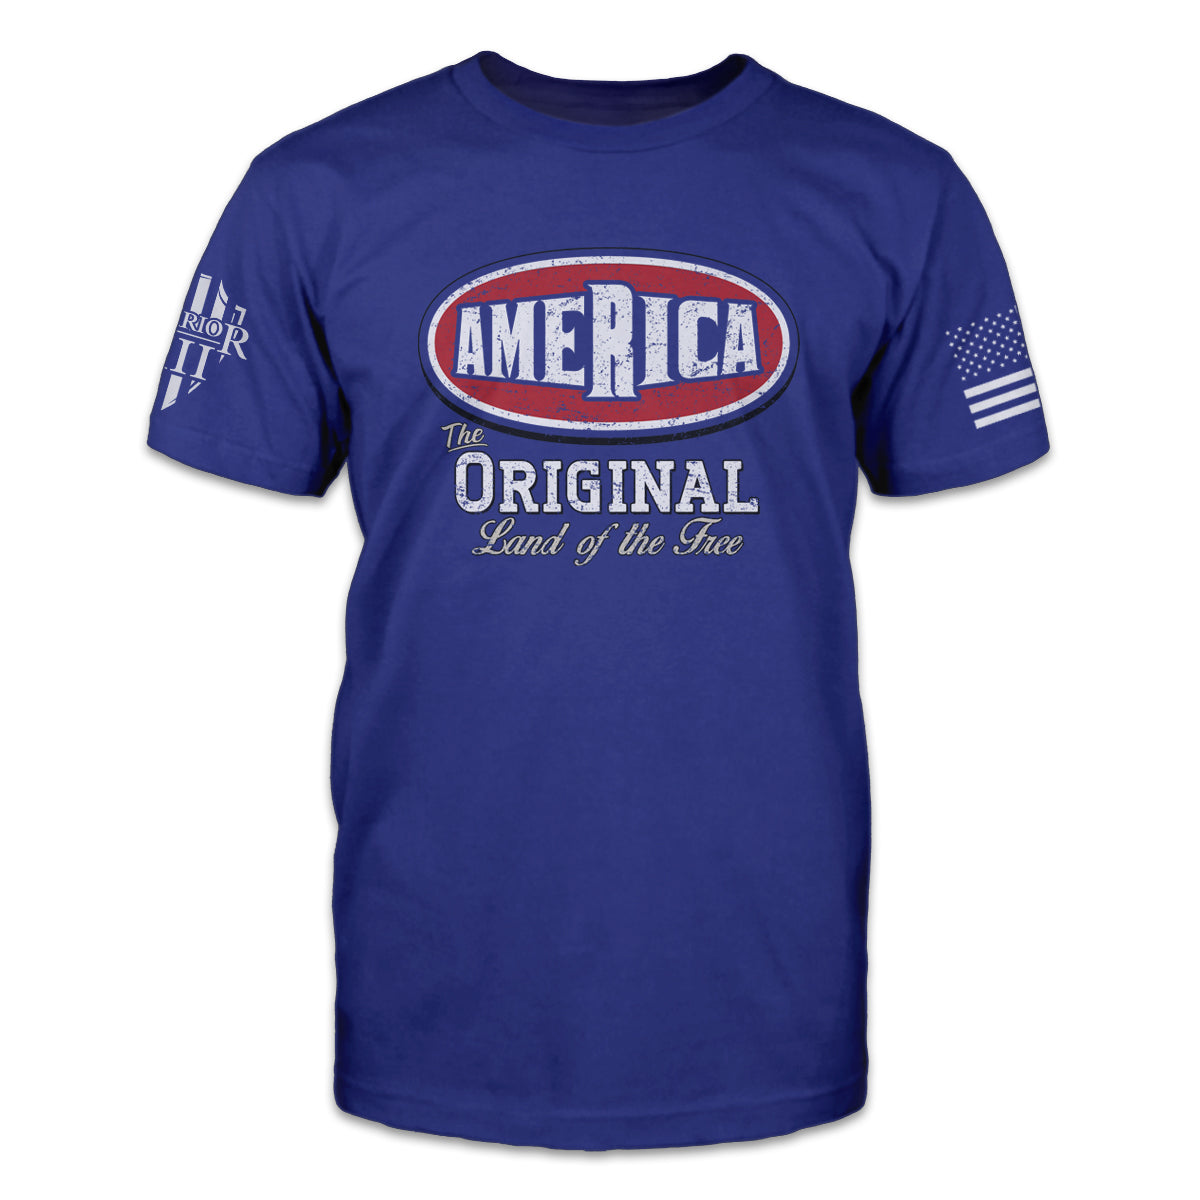 A blue t-shirt with "America - The Original Land Of The Free" printed on the front of the shirt. The back of this shirt has no printing. This shirt features our brand logo on the right sleeve and the American Flag on the left sleeve.